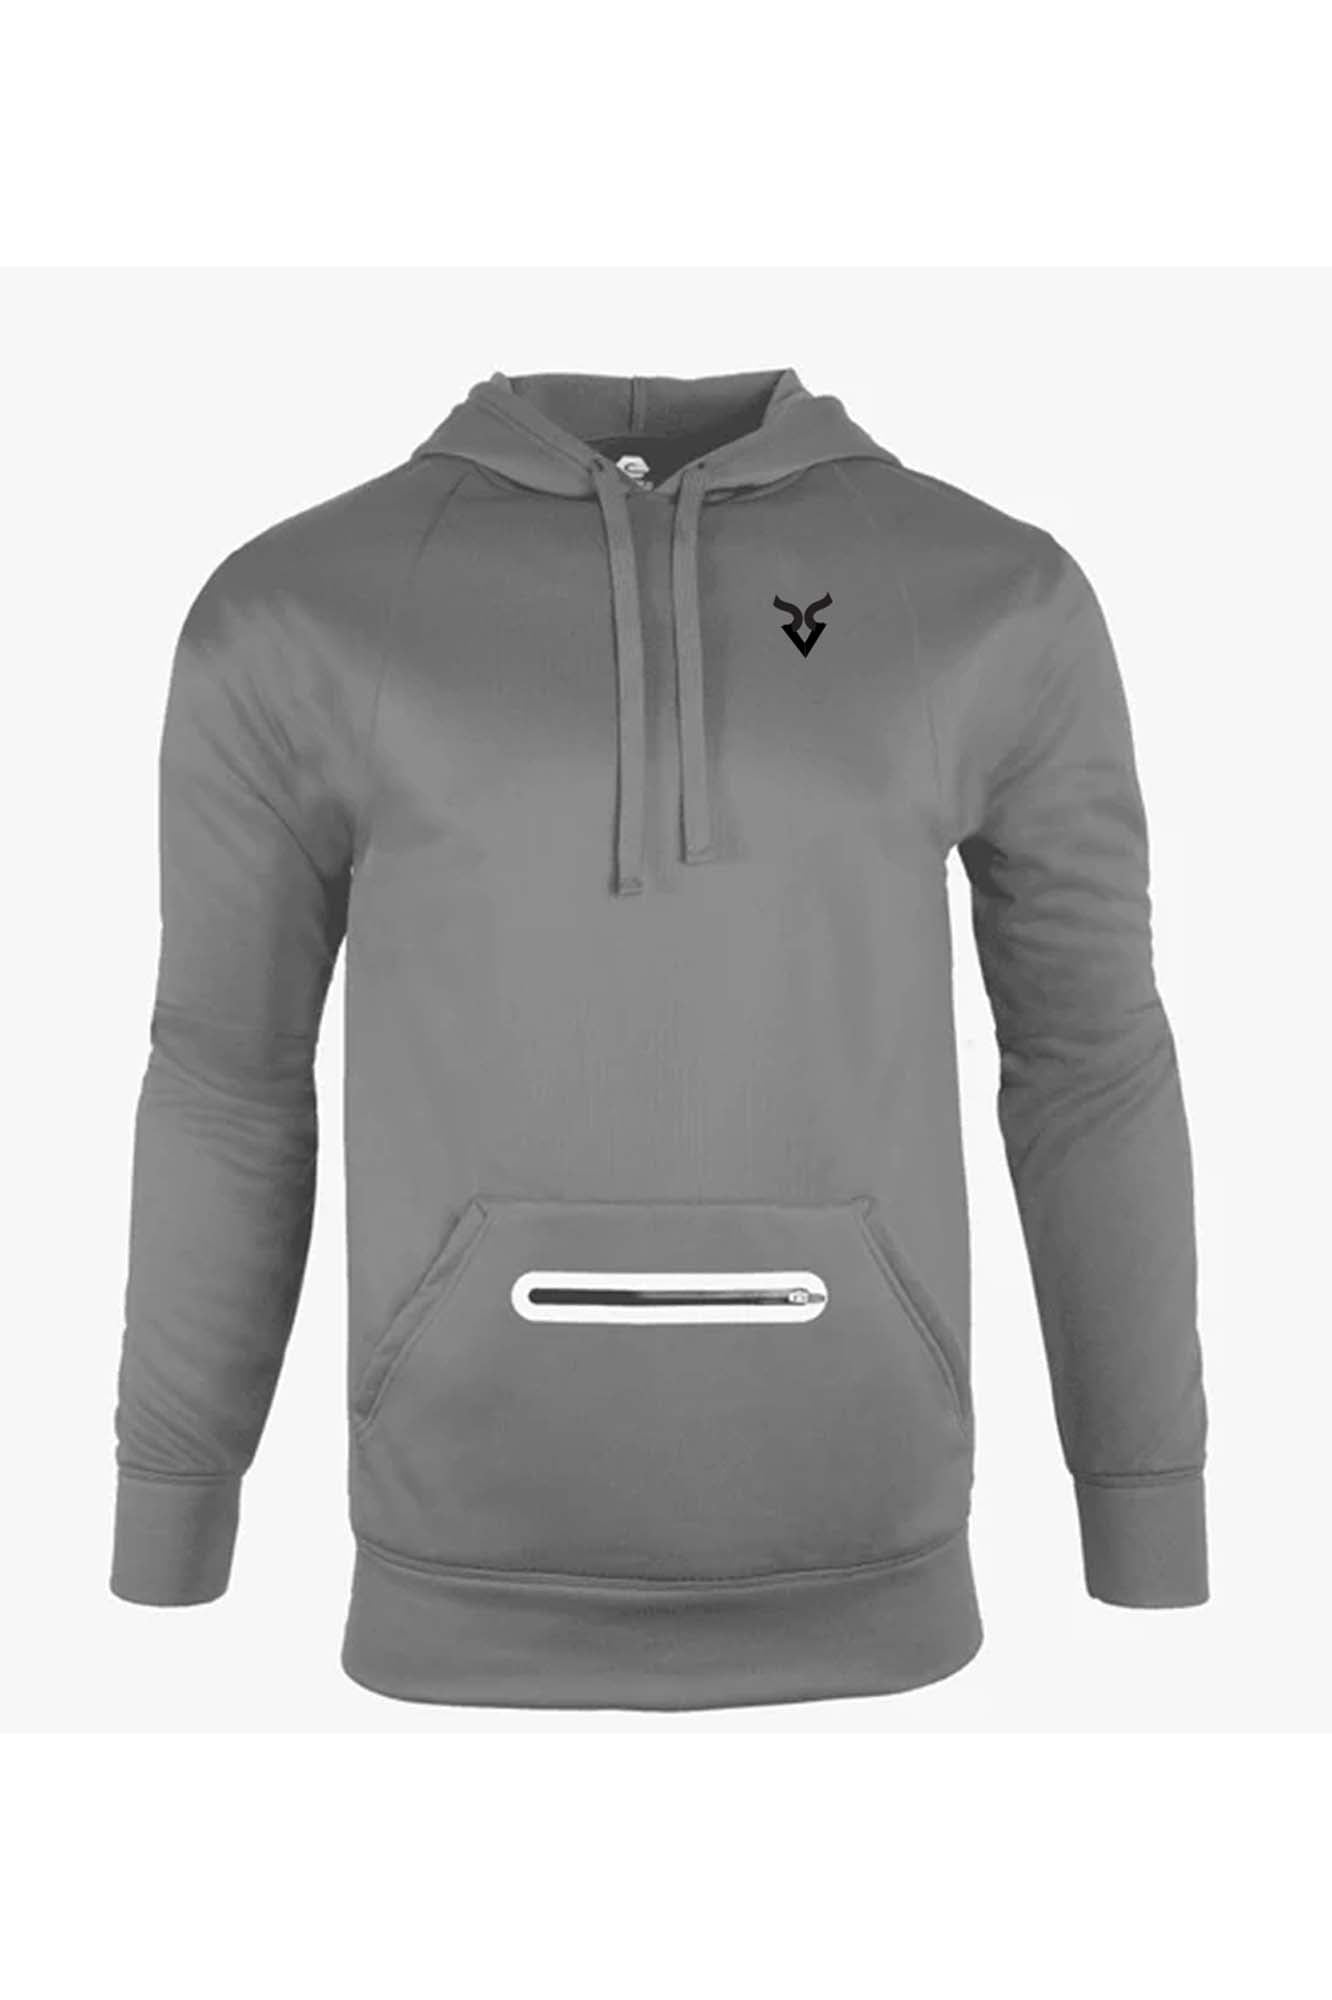 Evolution of the Goat Polyester Hoodie with Pouch Zipper